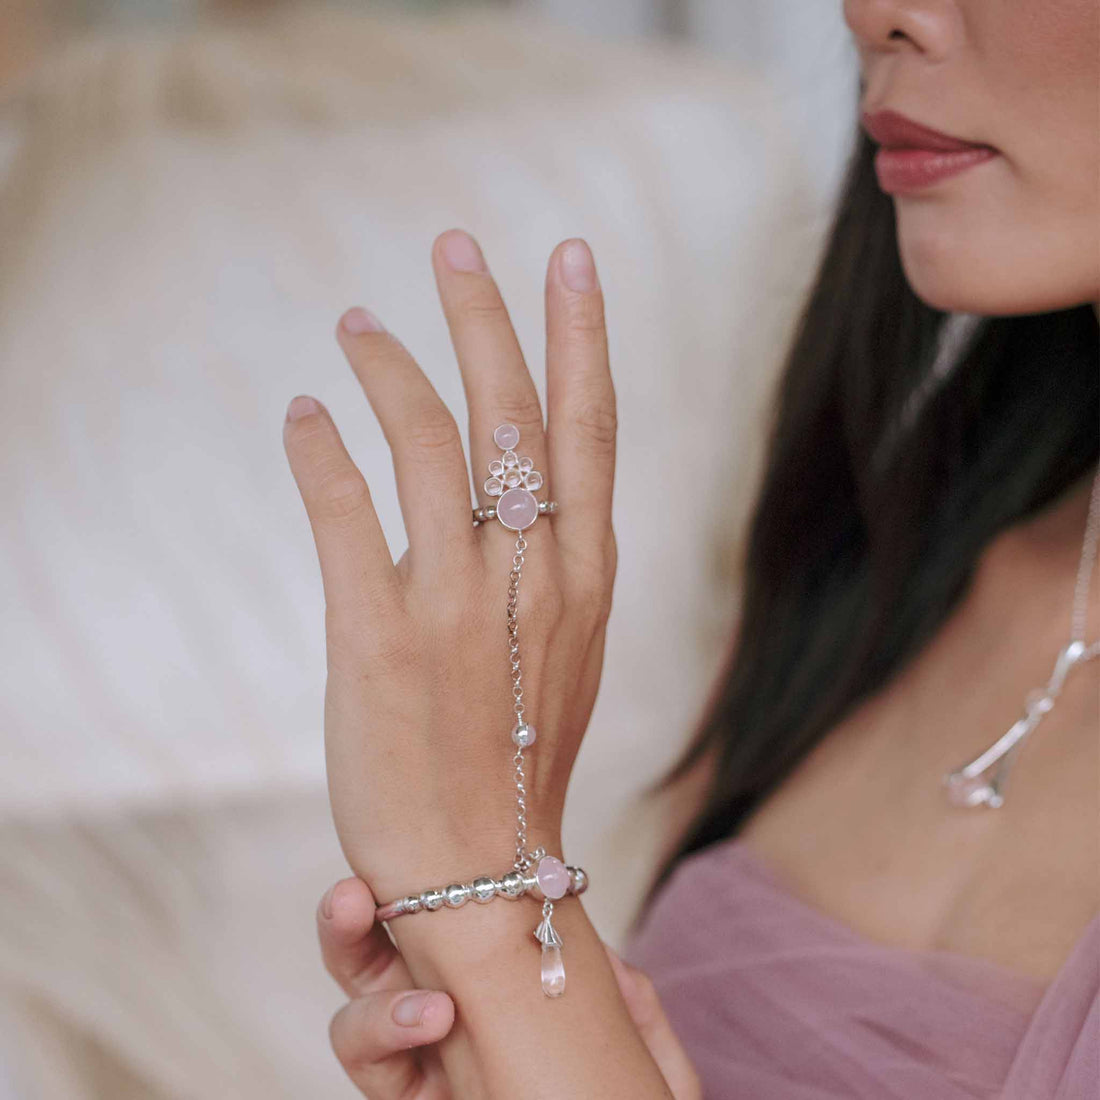 Elegant 'Infinite Gratitude' Sterling Silver Hand Chain adorned with Solid Crystal and Rose Quartz Sphere Gemstones. Embrace the Power of Gratitude